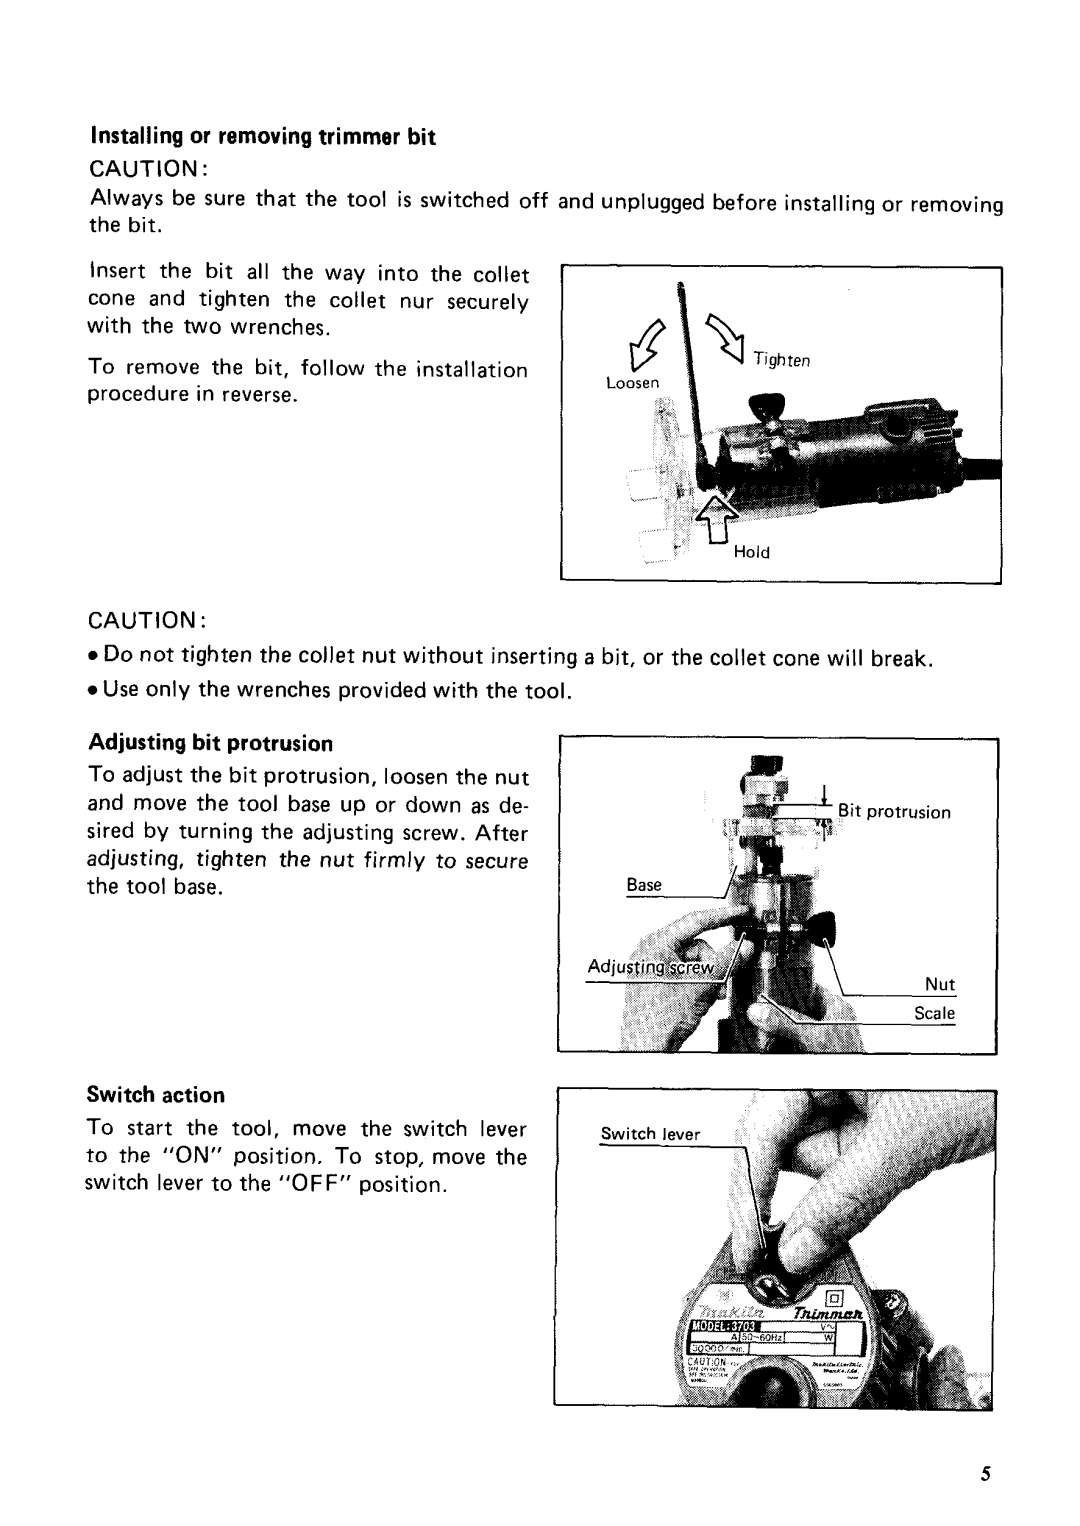 Makita 3703 instruction manual Installing or removing trimmer bit, Adjusting bit protrusion, Switch action 